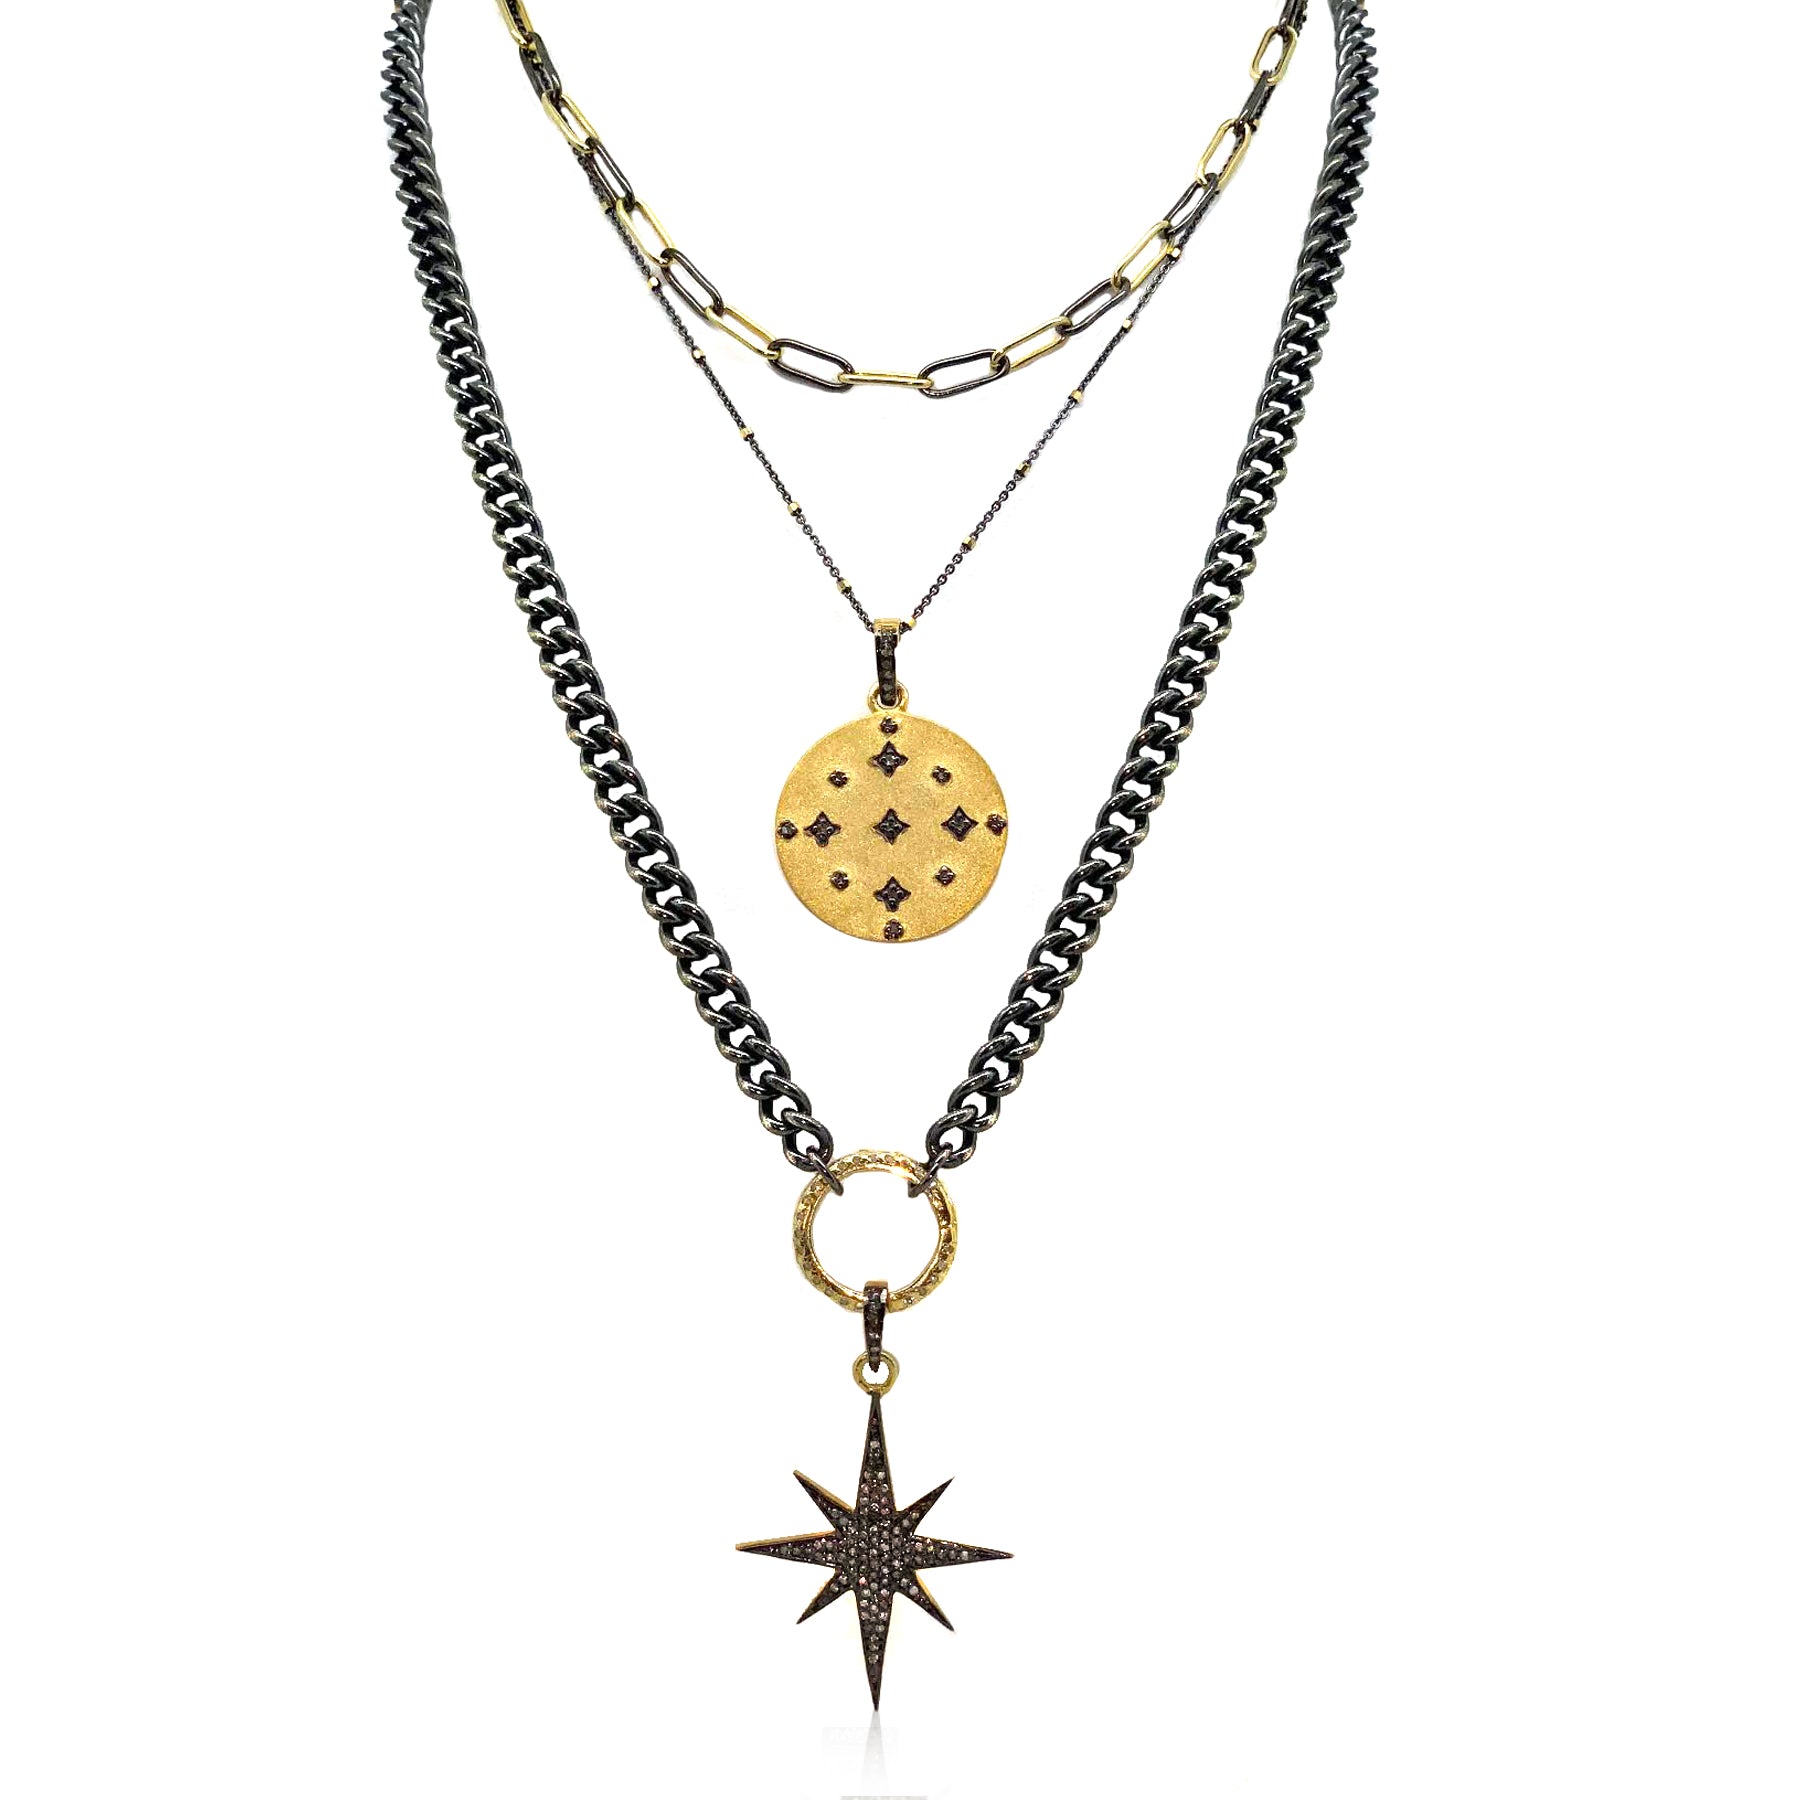 The Darkest Skys Have The Brightest Stars Necklace.